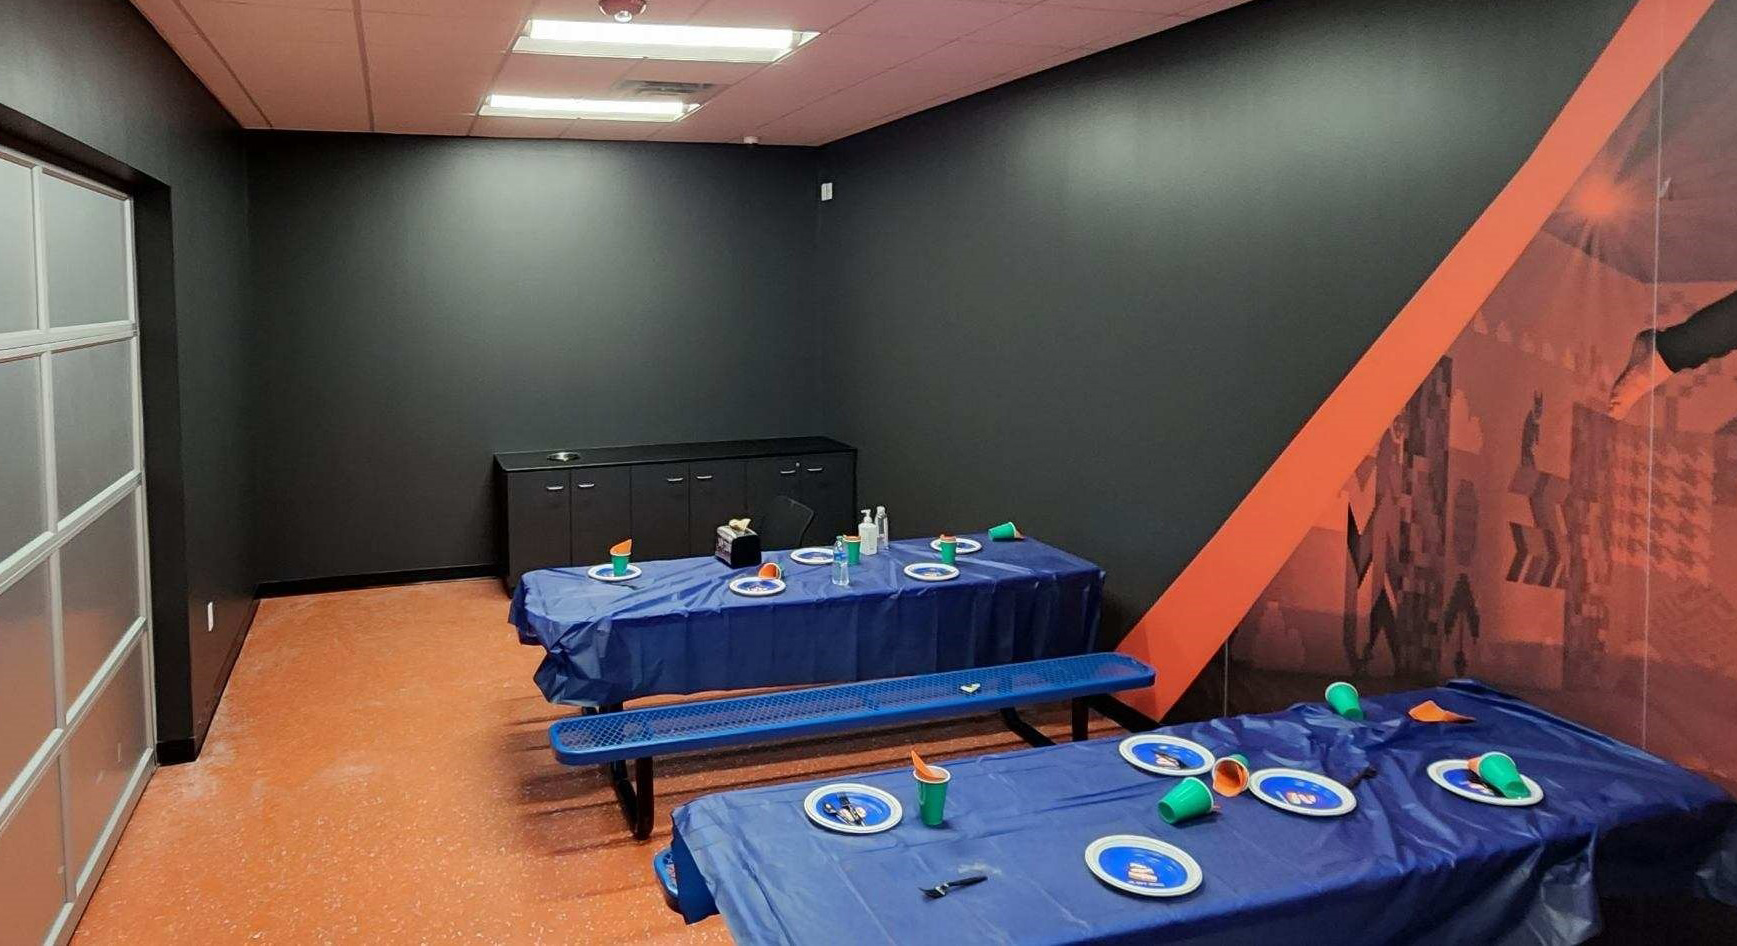 Sky Zone in Blaine, MN After